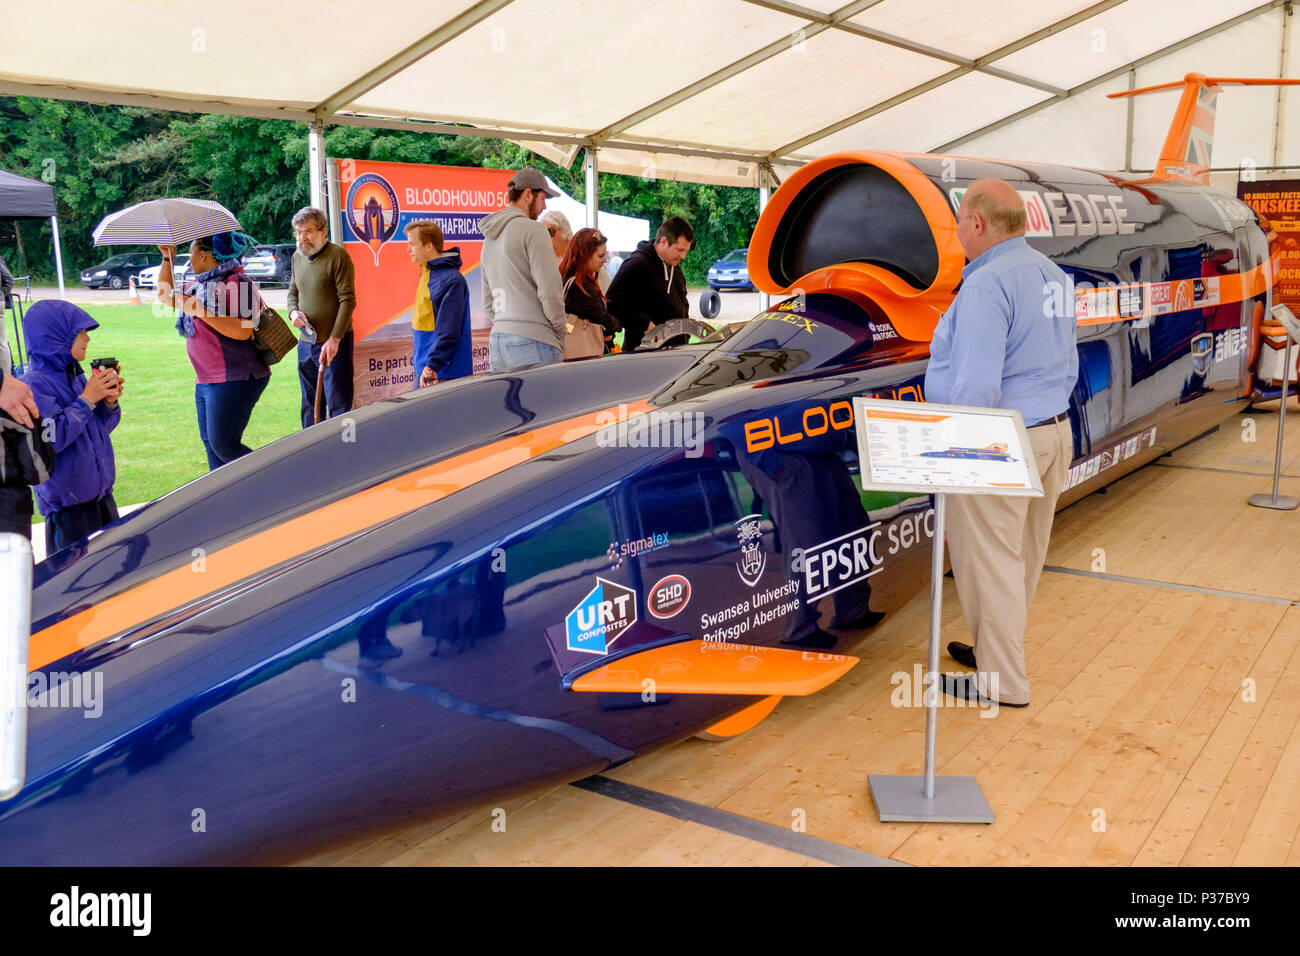 The 2018 Bath festival of motoring at Walcot Rugby Ground, Bath Somerset england uk Replica of Thrust SSC record breaking car Stock Photo